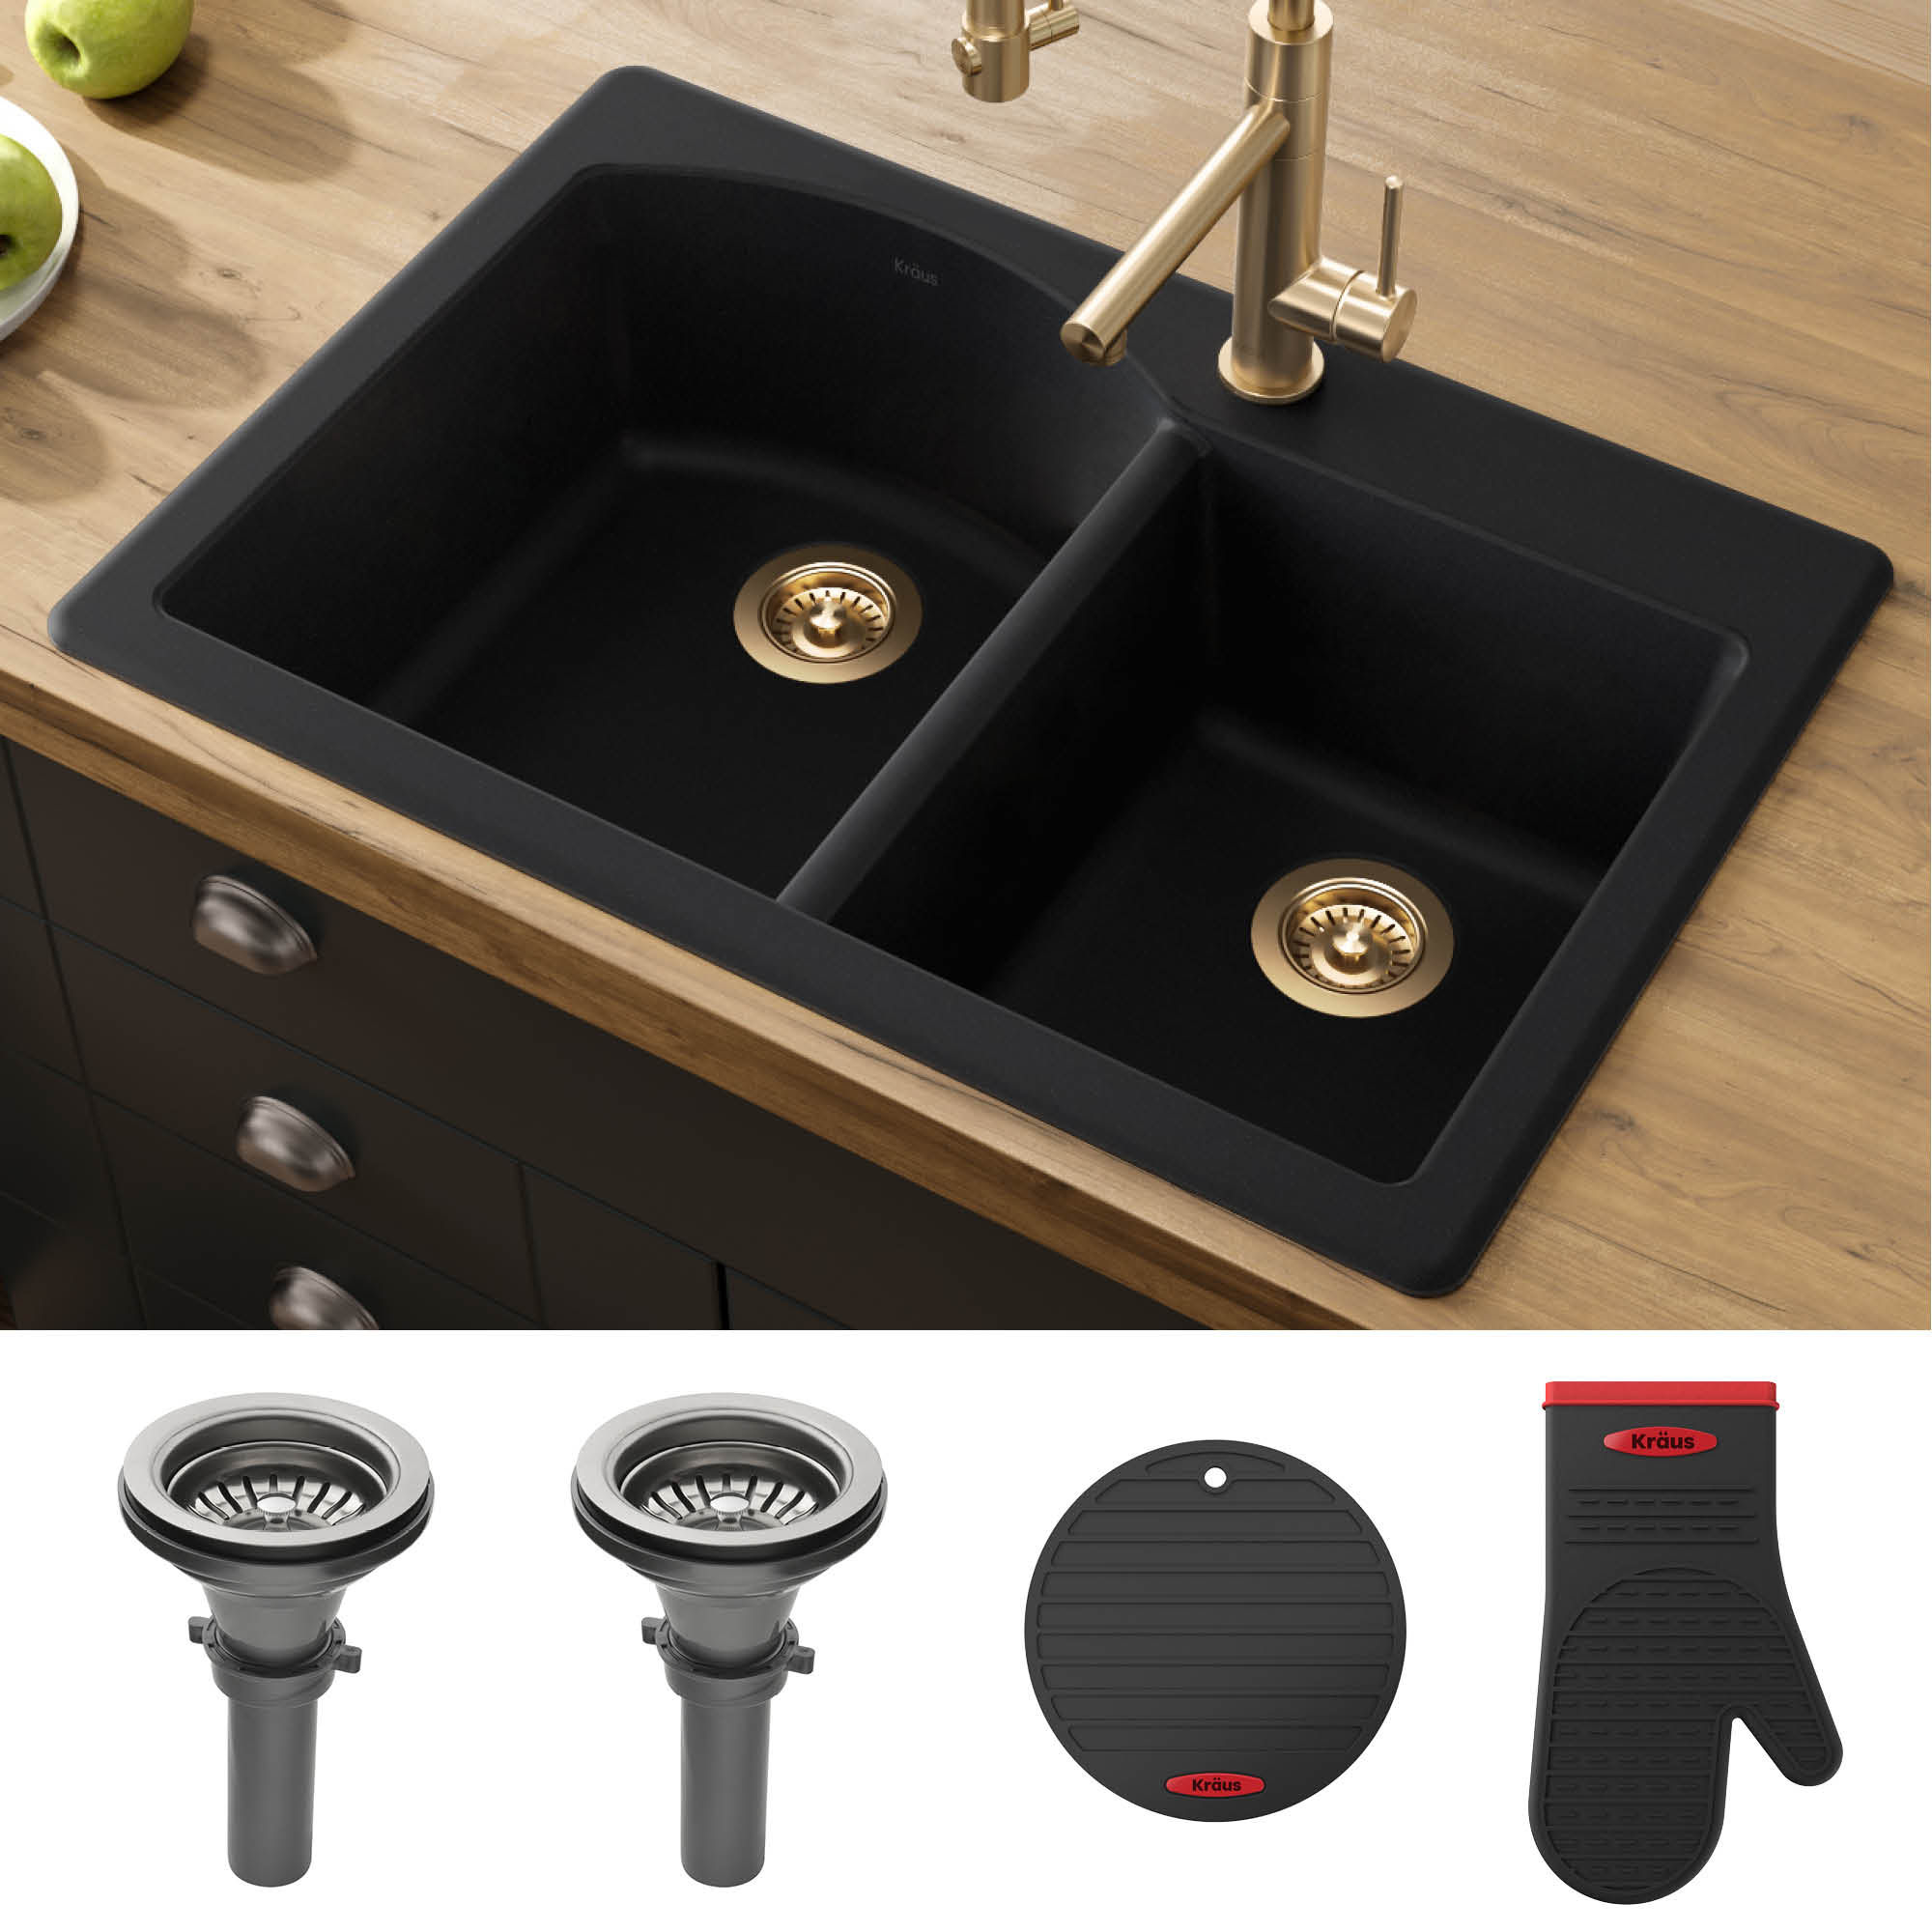 Chef 5 Min Meals 33 in. Dual Mount 60 to 40 Double Bowl Granite Kitchen Sink, Black